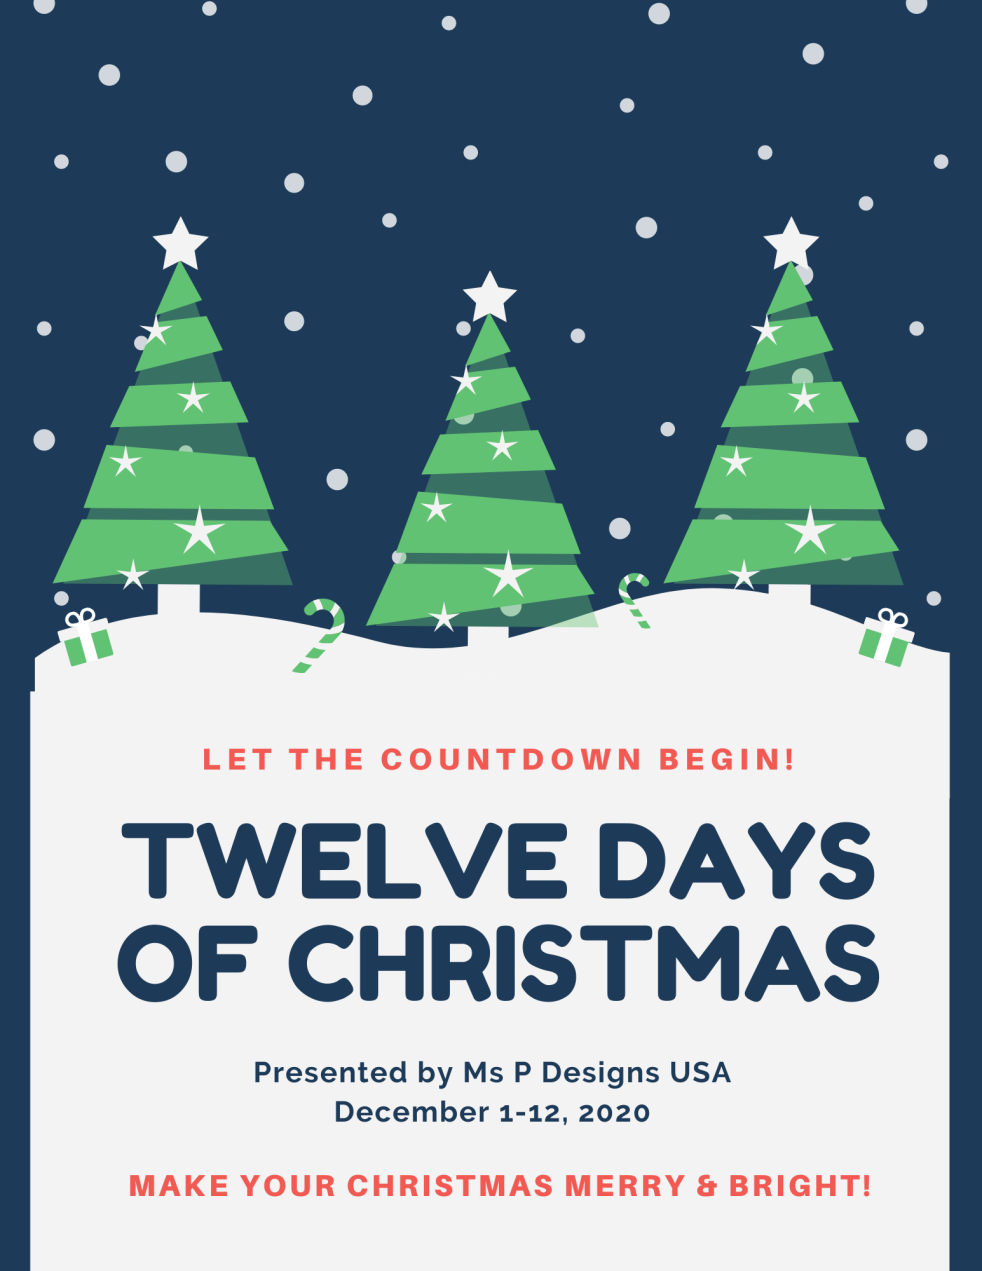 Twelve Days of Christmas 2020 by Ms P Designs USA